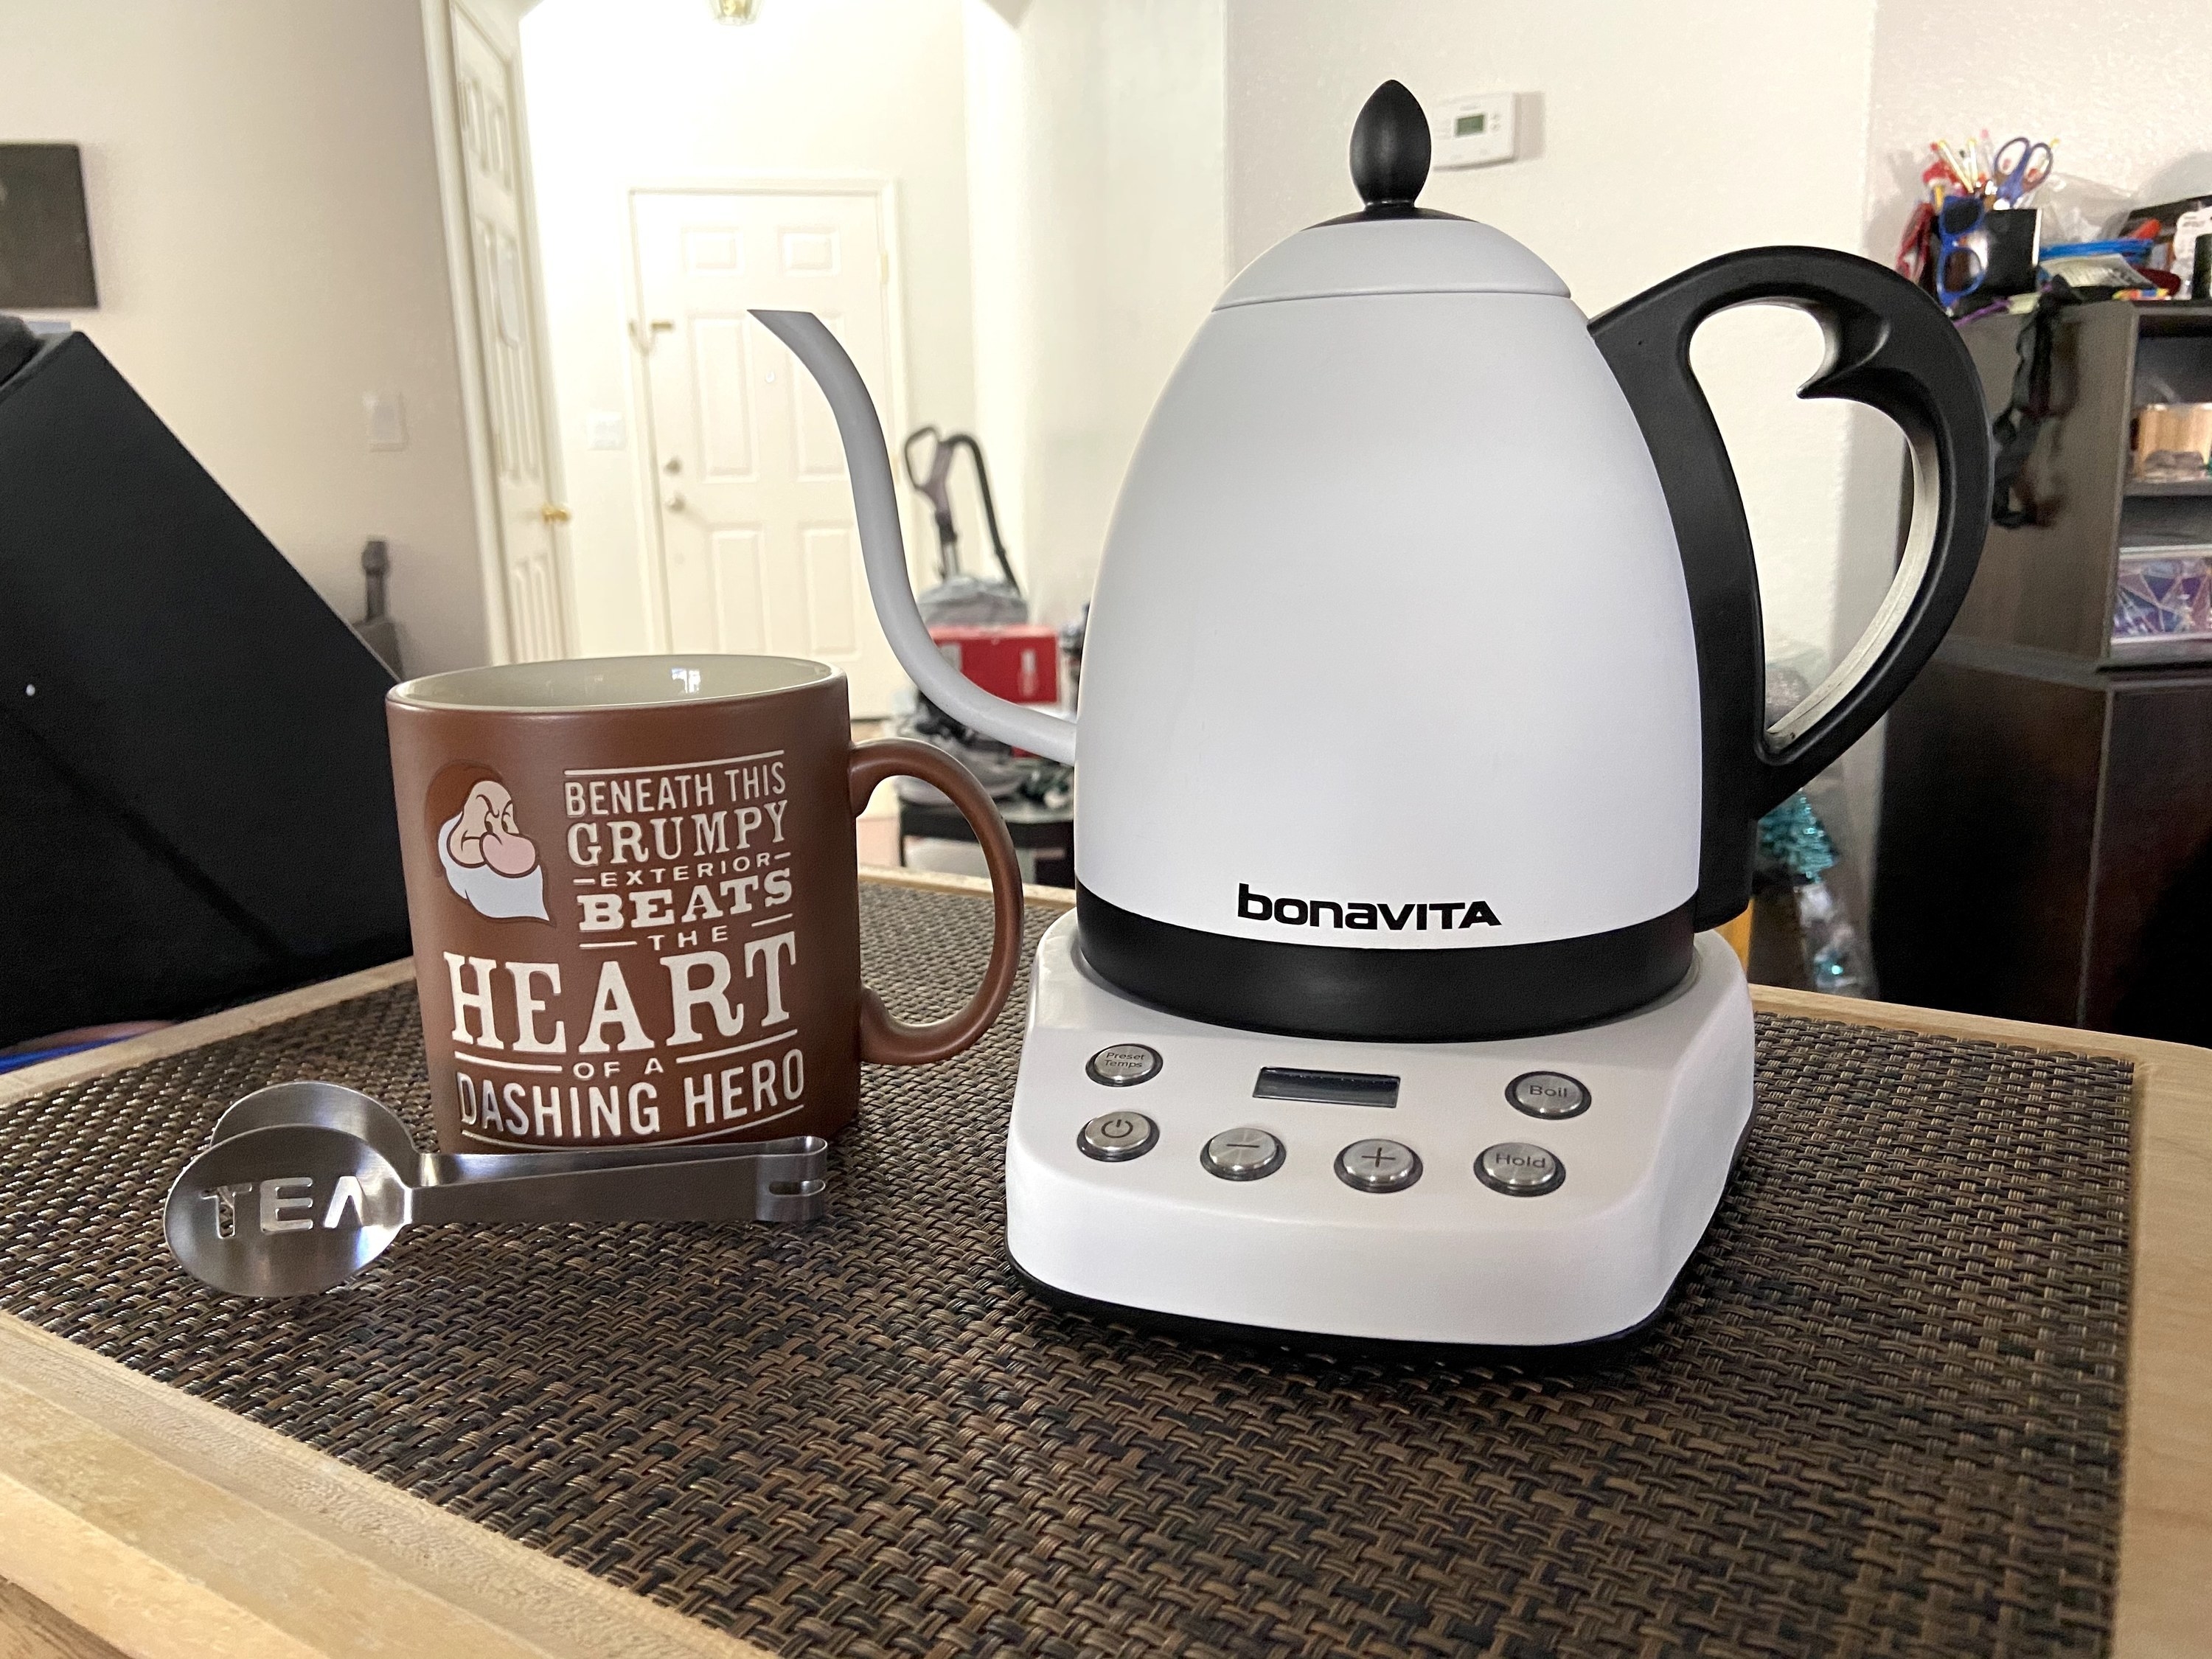 The electric kettle on a counter in white.